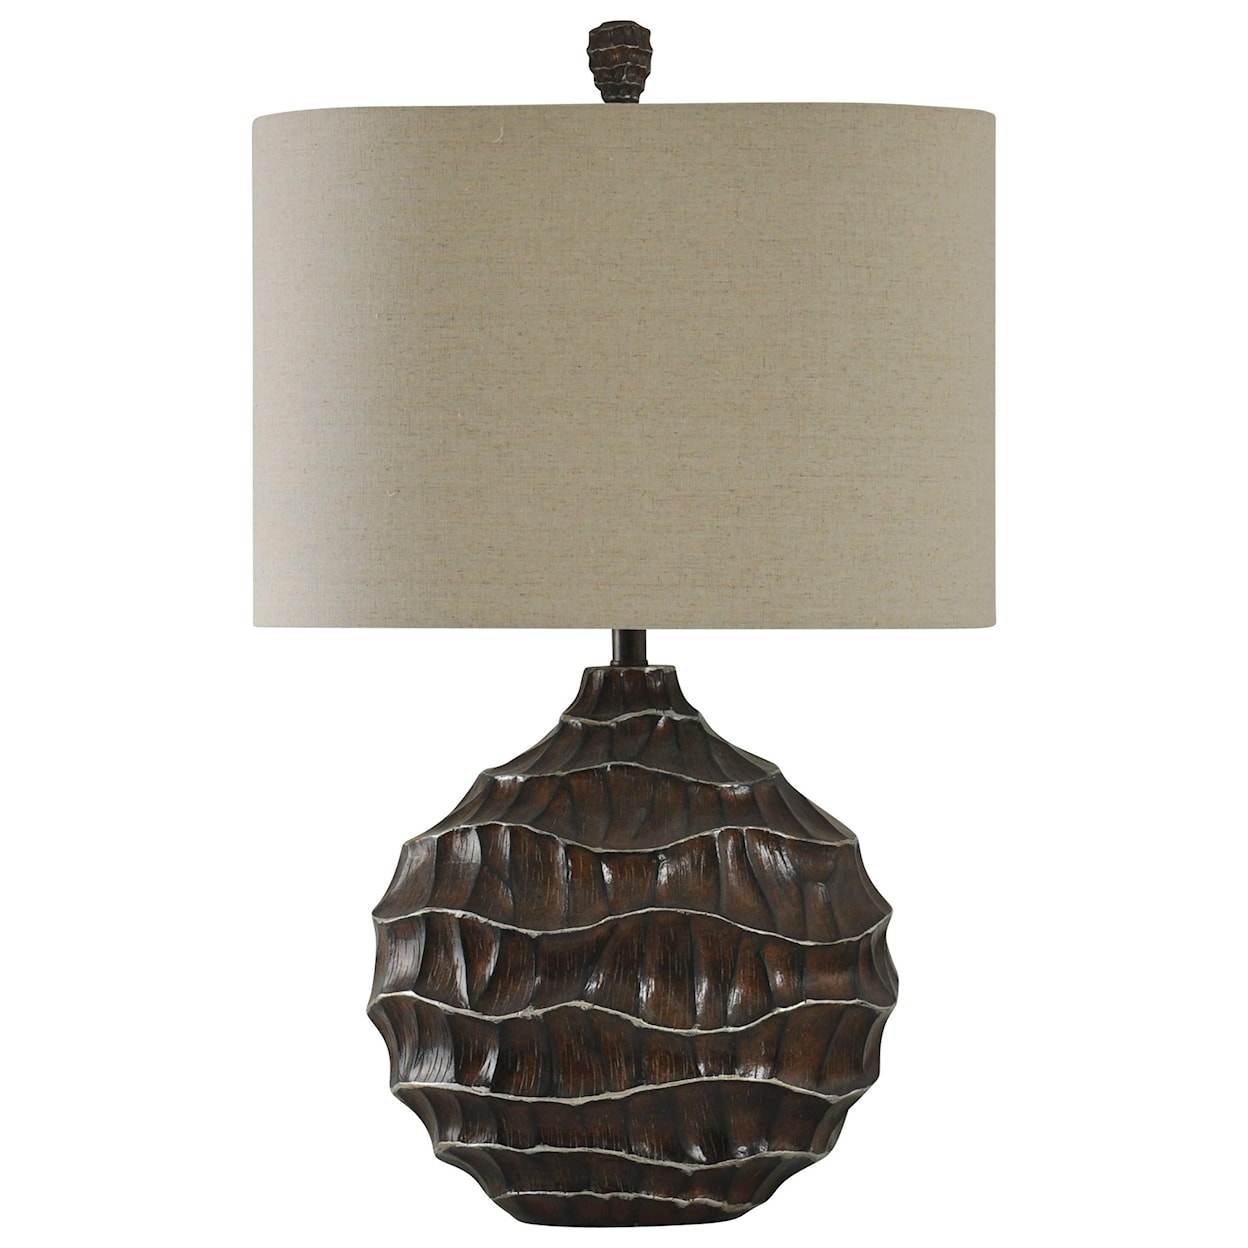 StyleCraft Lamps Ripple Effect Transitional Table Lamp